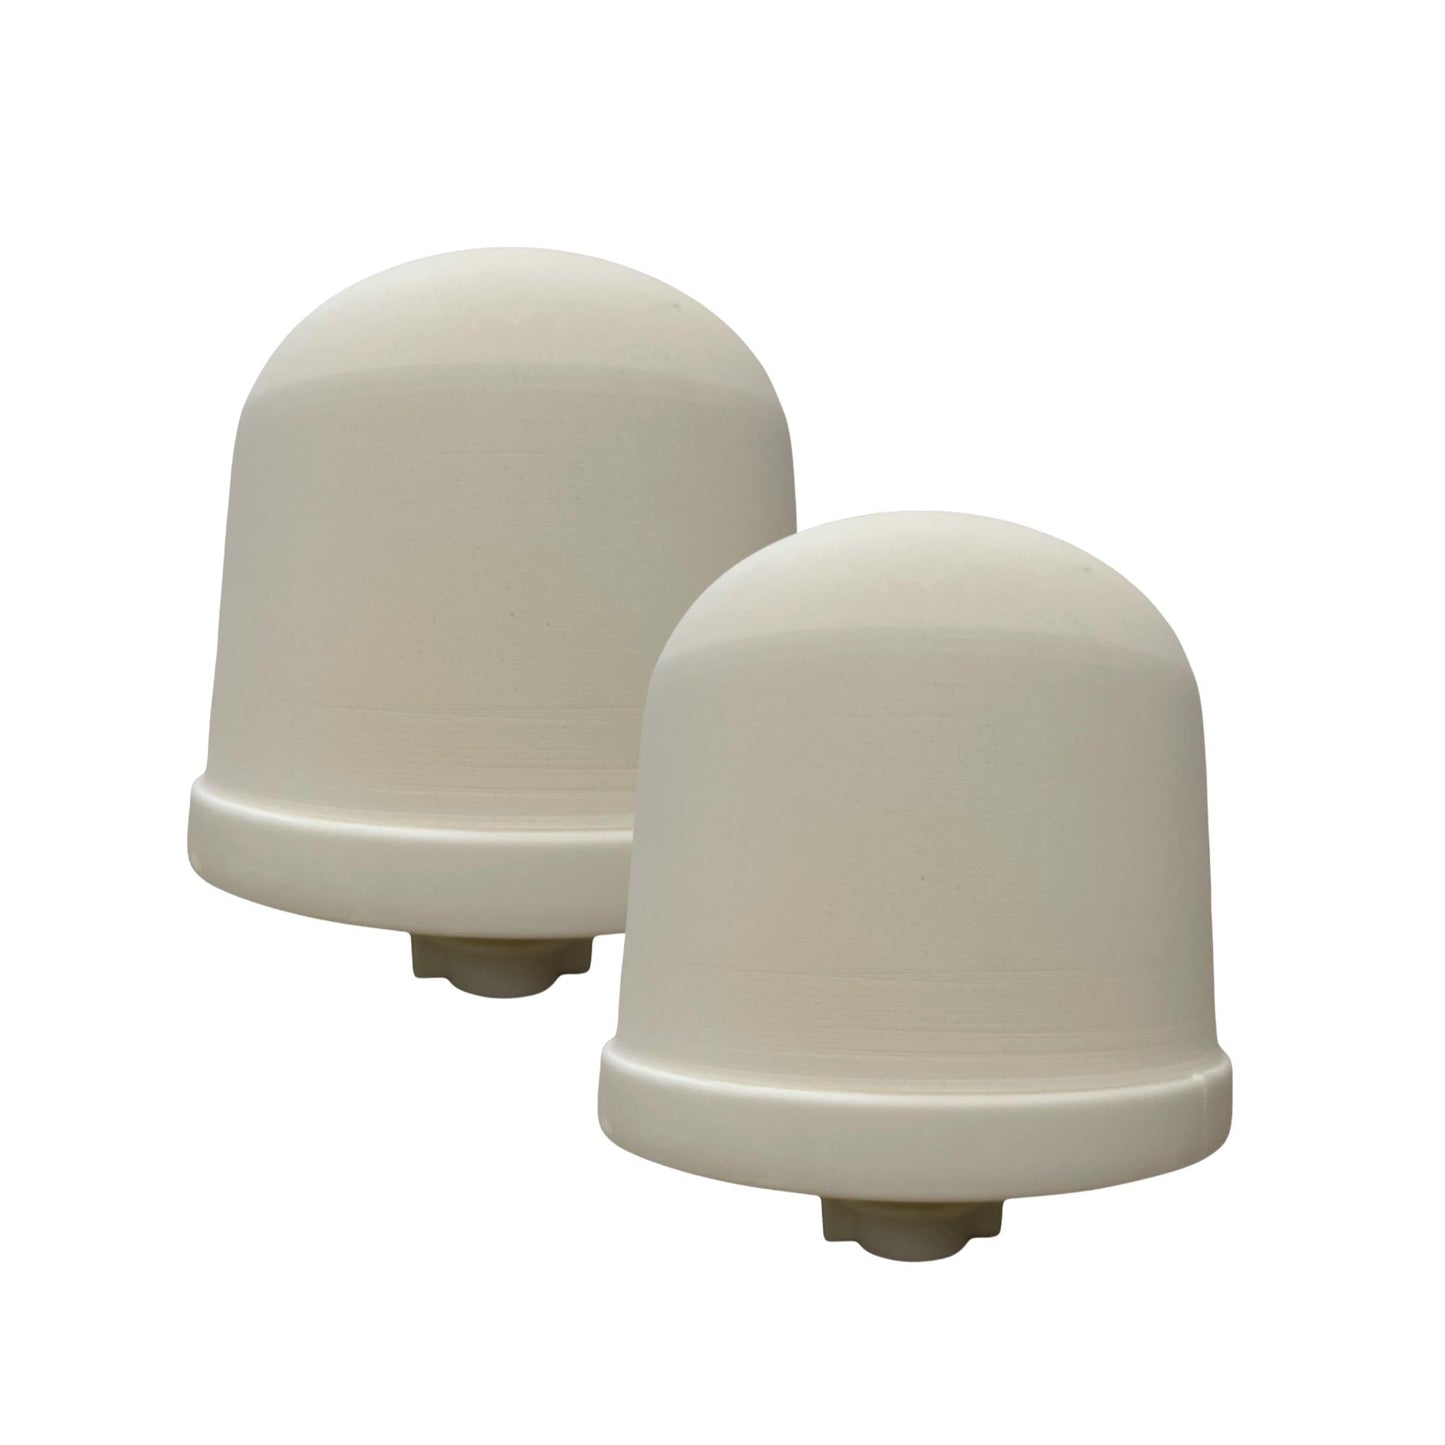 Ceramic Dome Globe Filter Cartridges - For 8 Stage Water Filters Purifiers Bulk